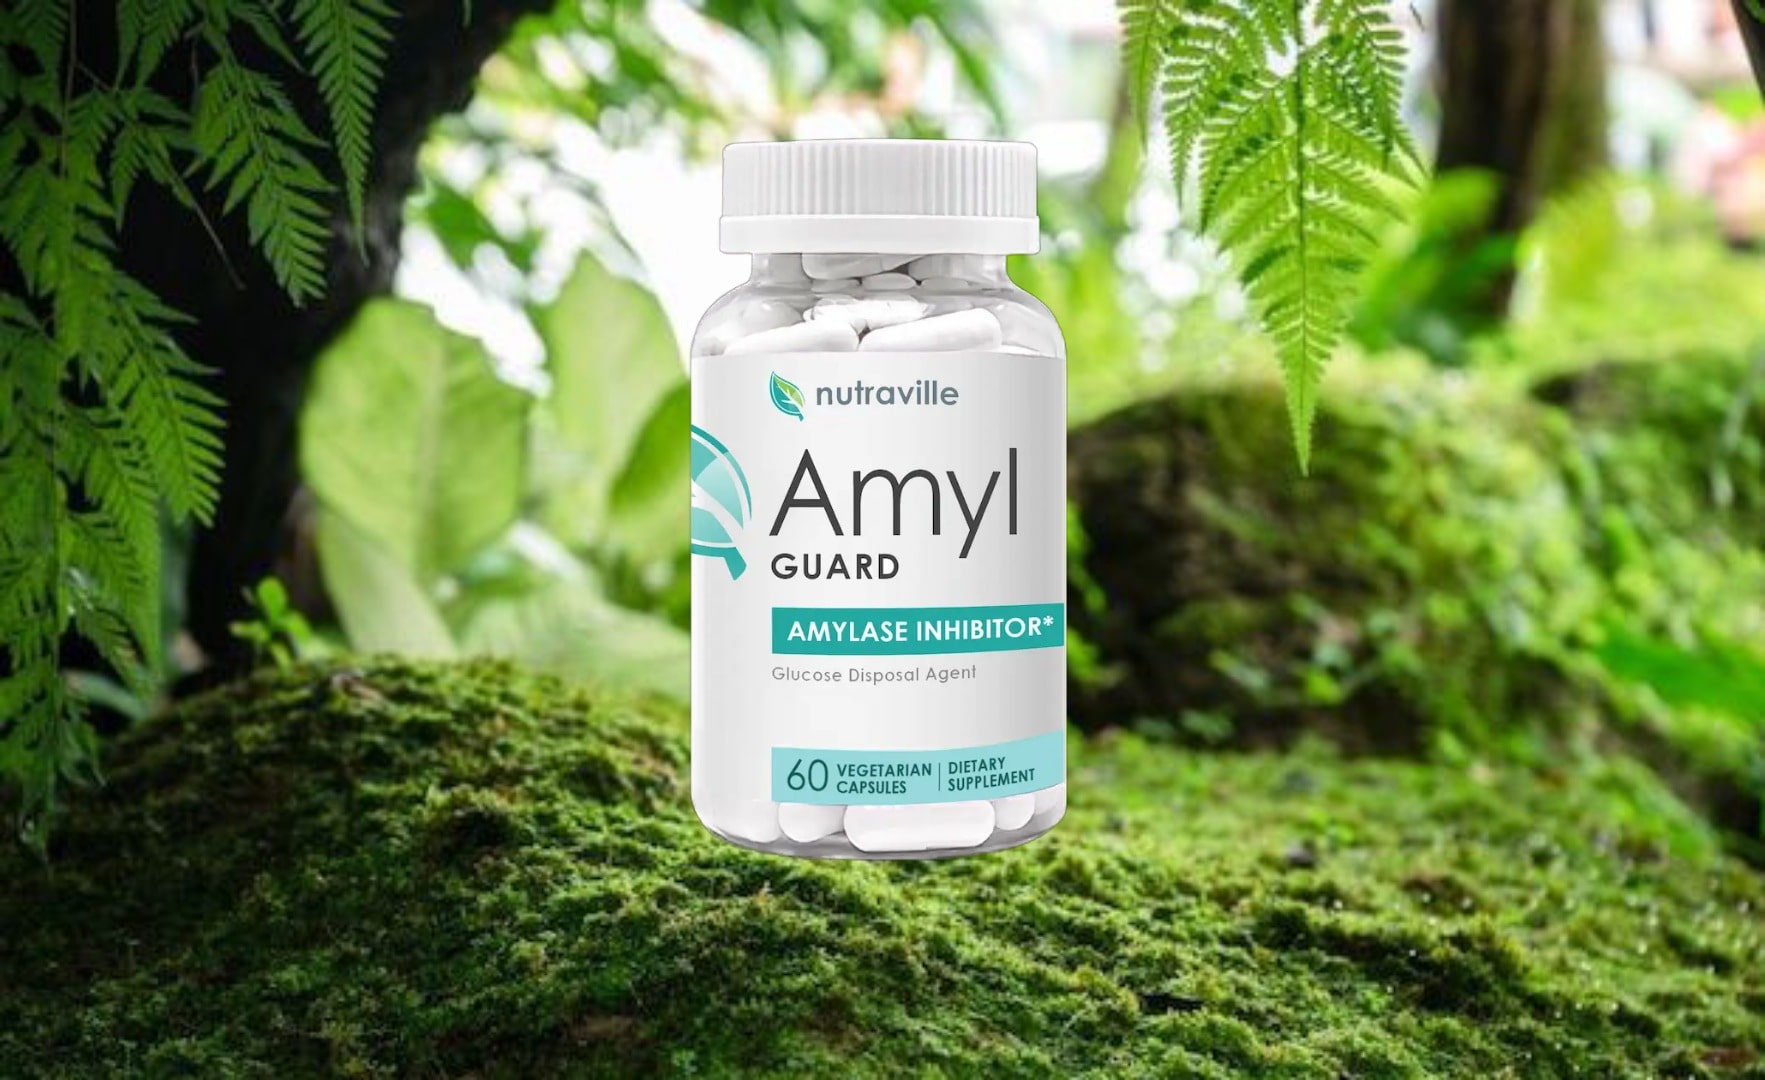 AmylGuard Review - Read More About This Dietary Supplement(CUSTOMER SCAM ALERT - 2023)